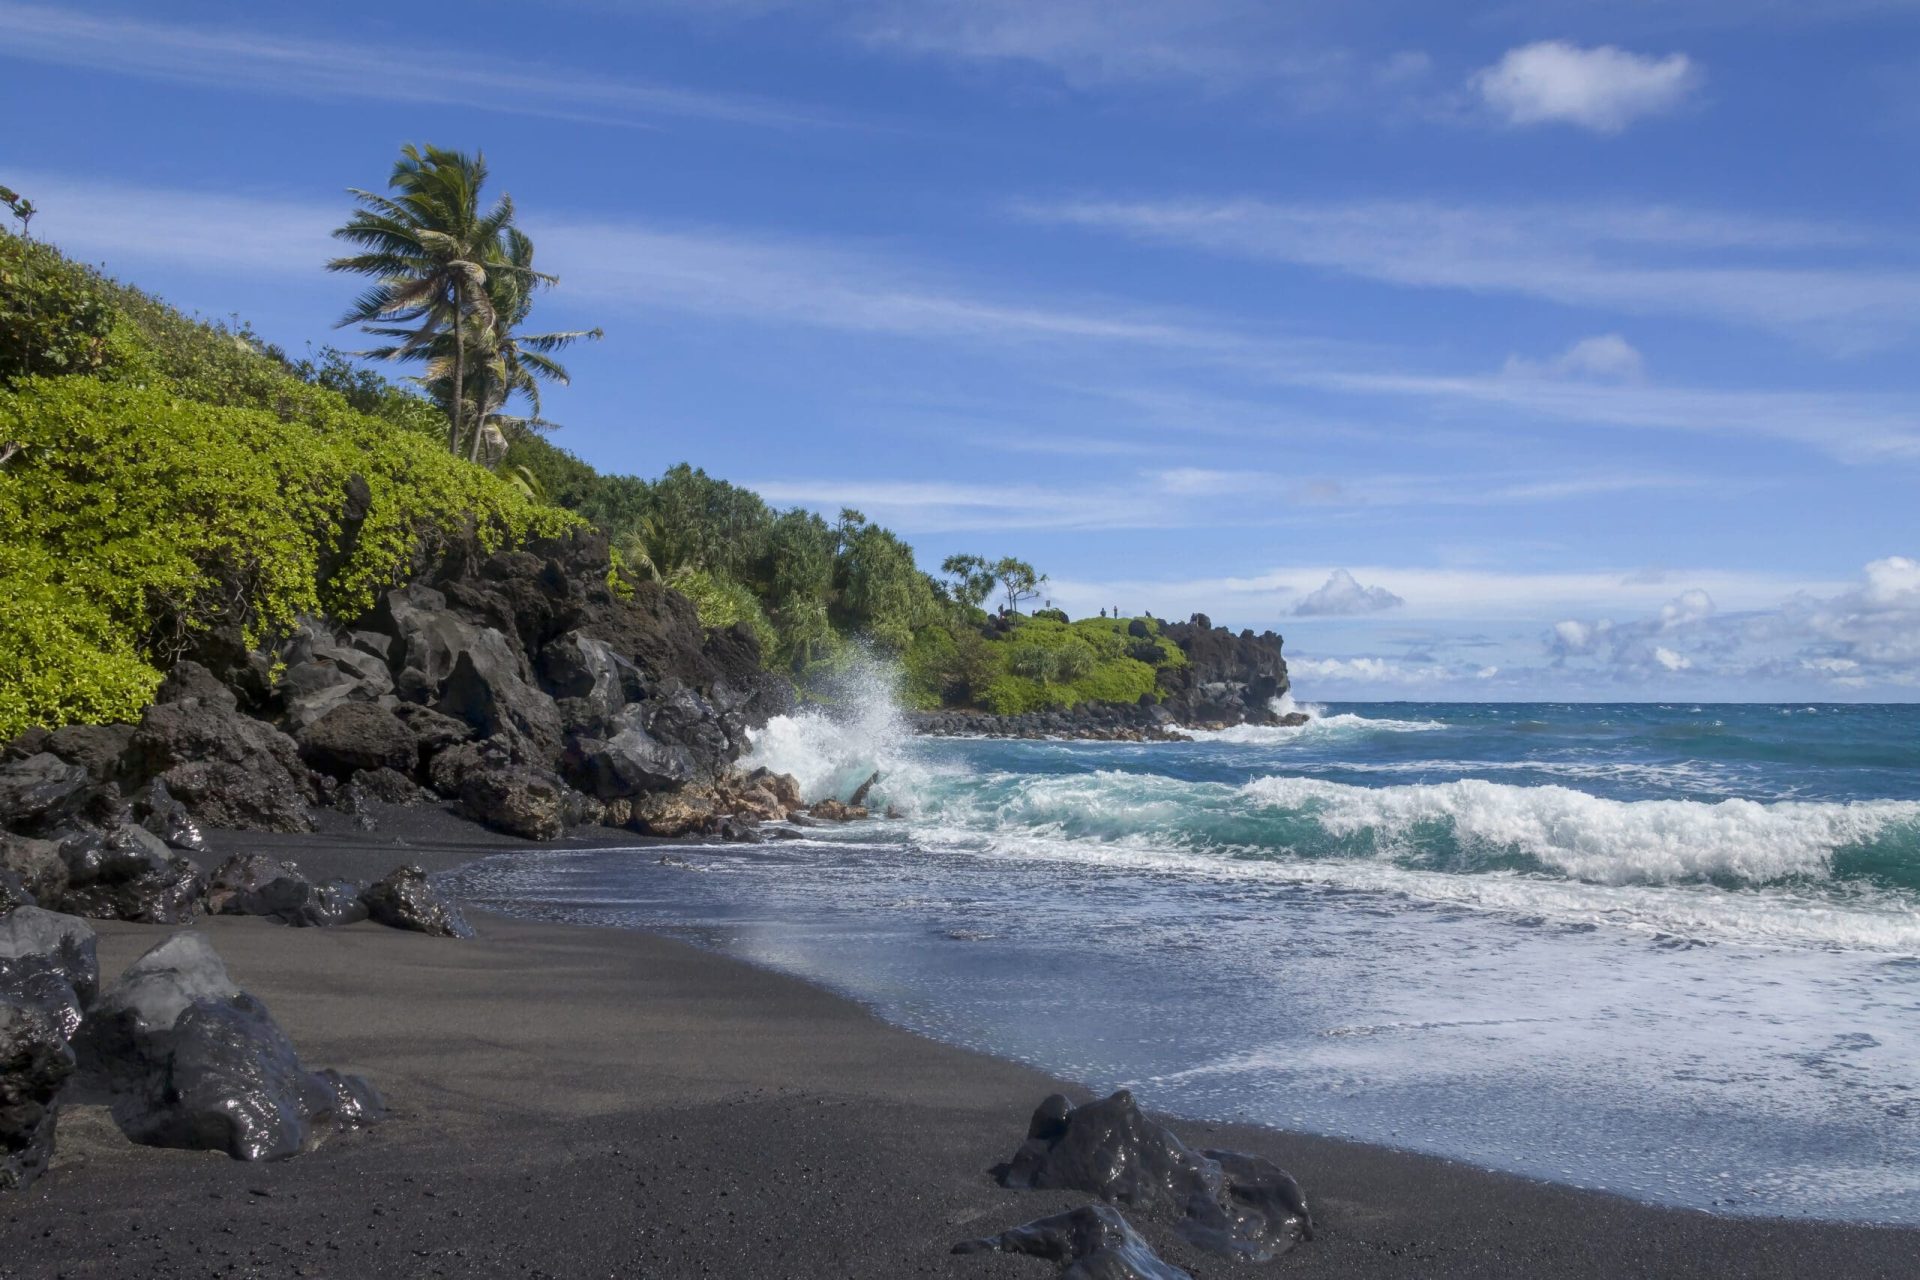 What are the options for a private tour of the Road to Hana?